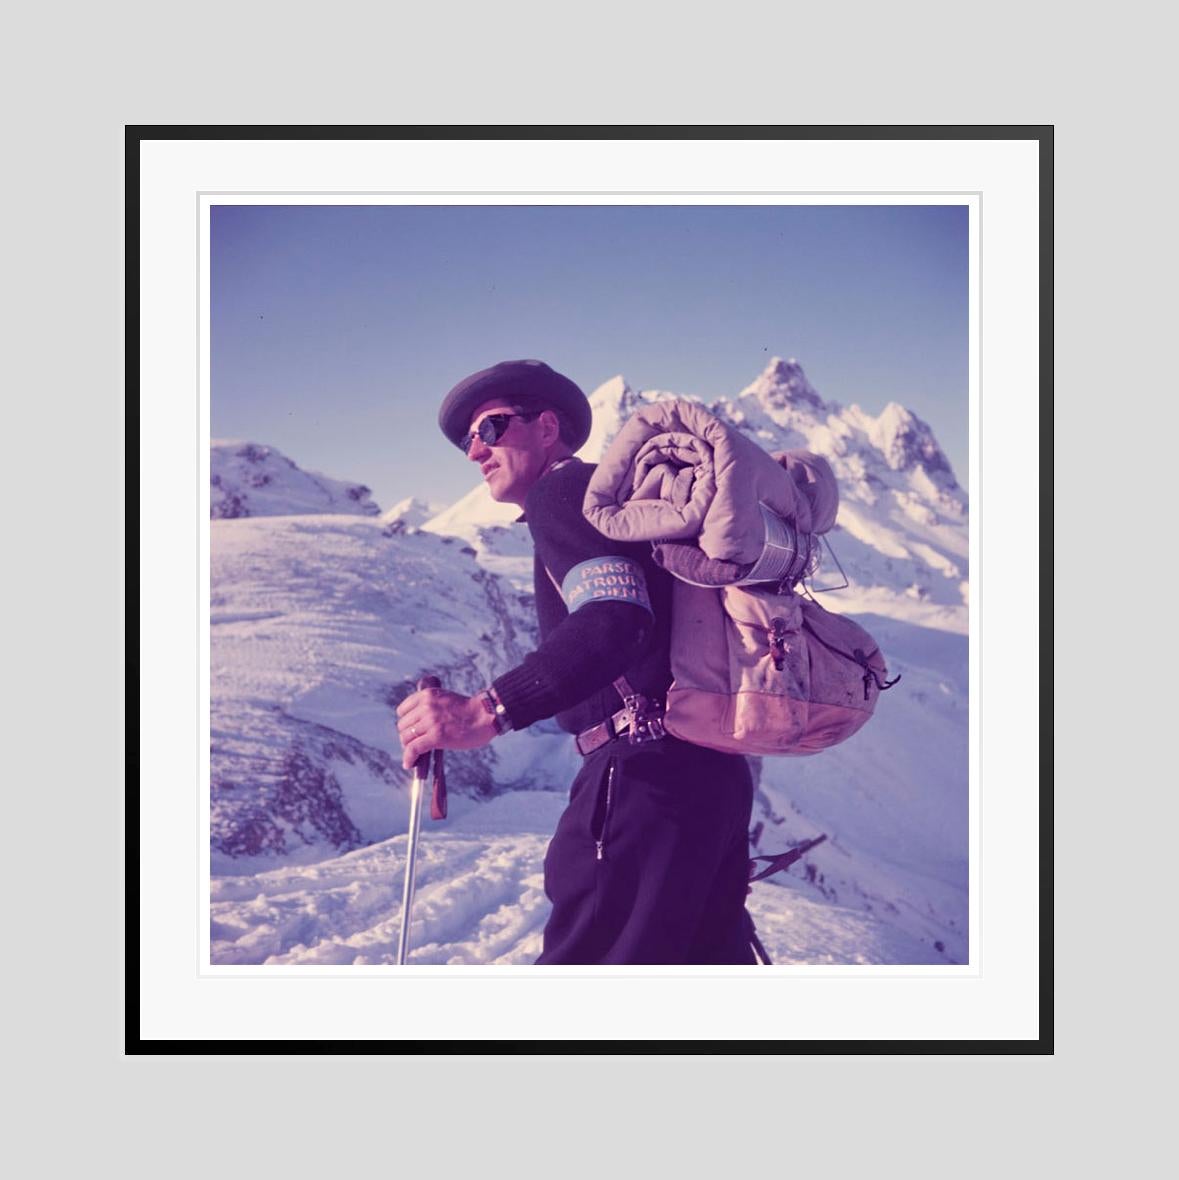 Mountain Top 

1951

A member of the Klosters ski patrol, Switzerland, 1951

by Toni Frissell

30 x 30